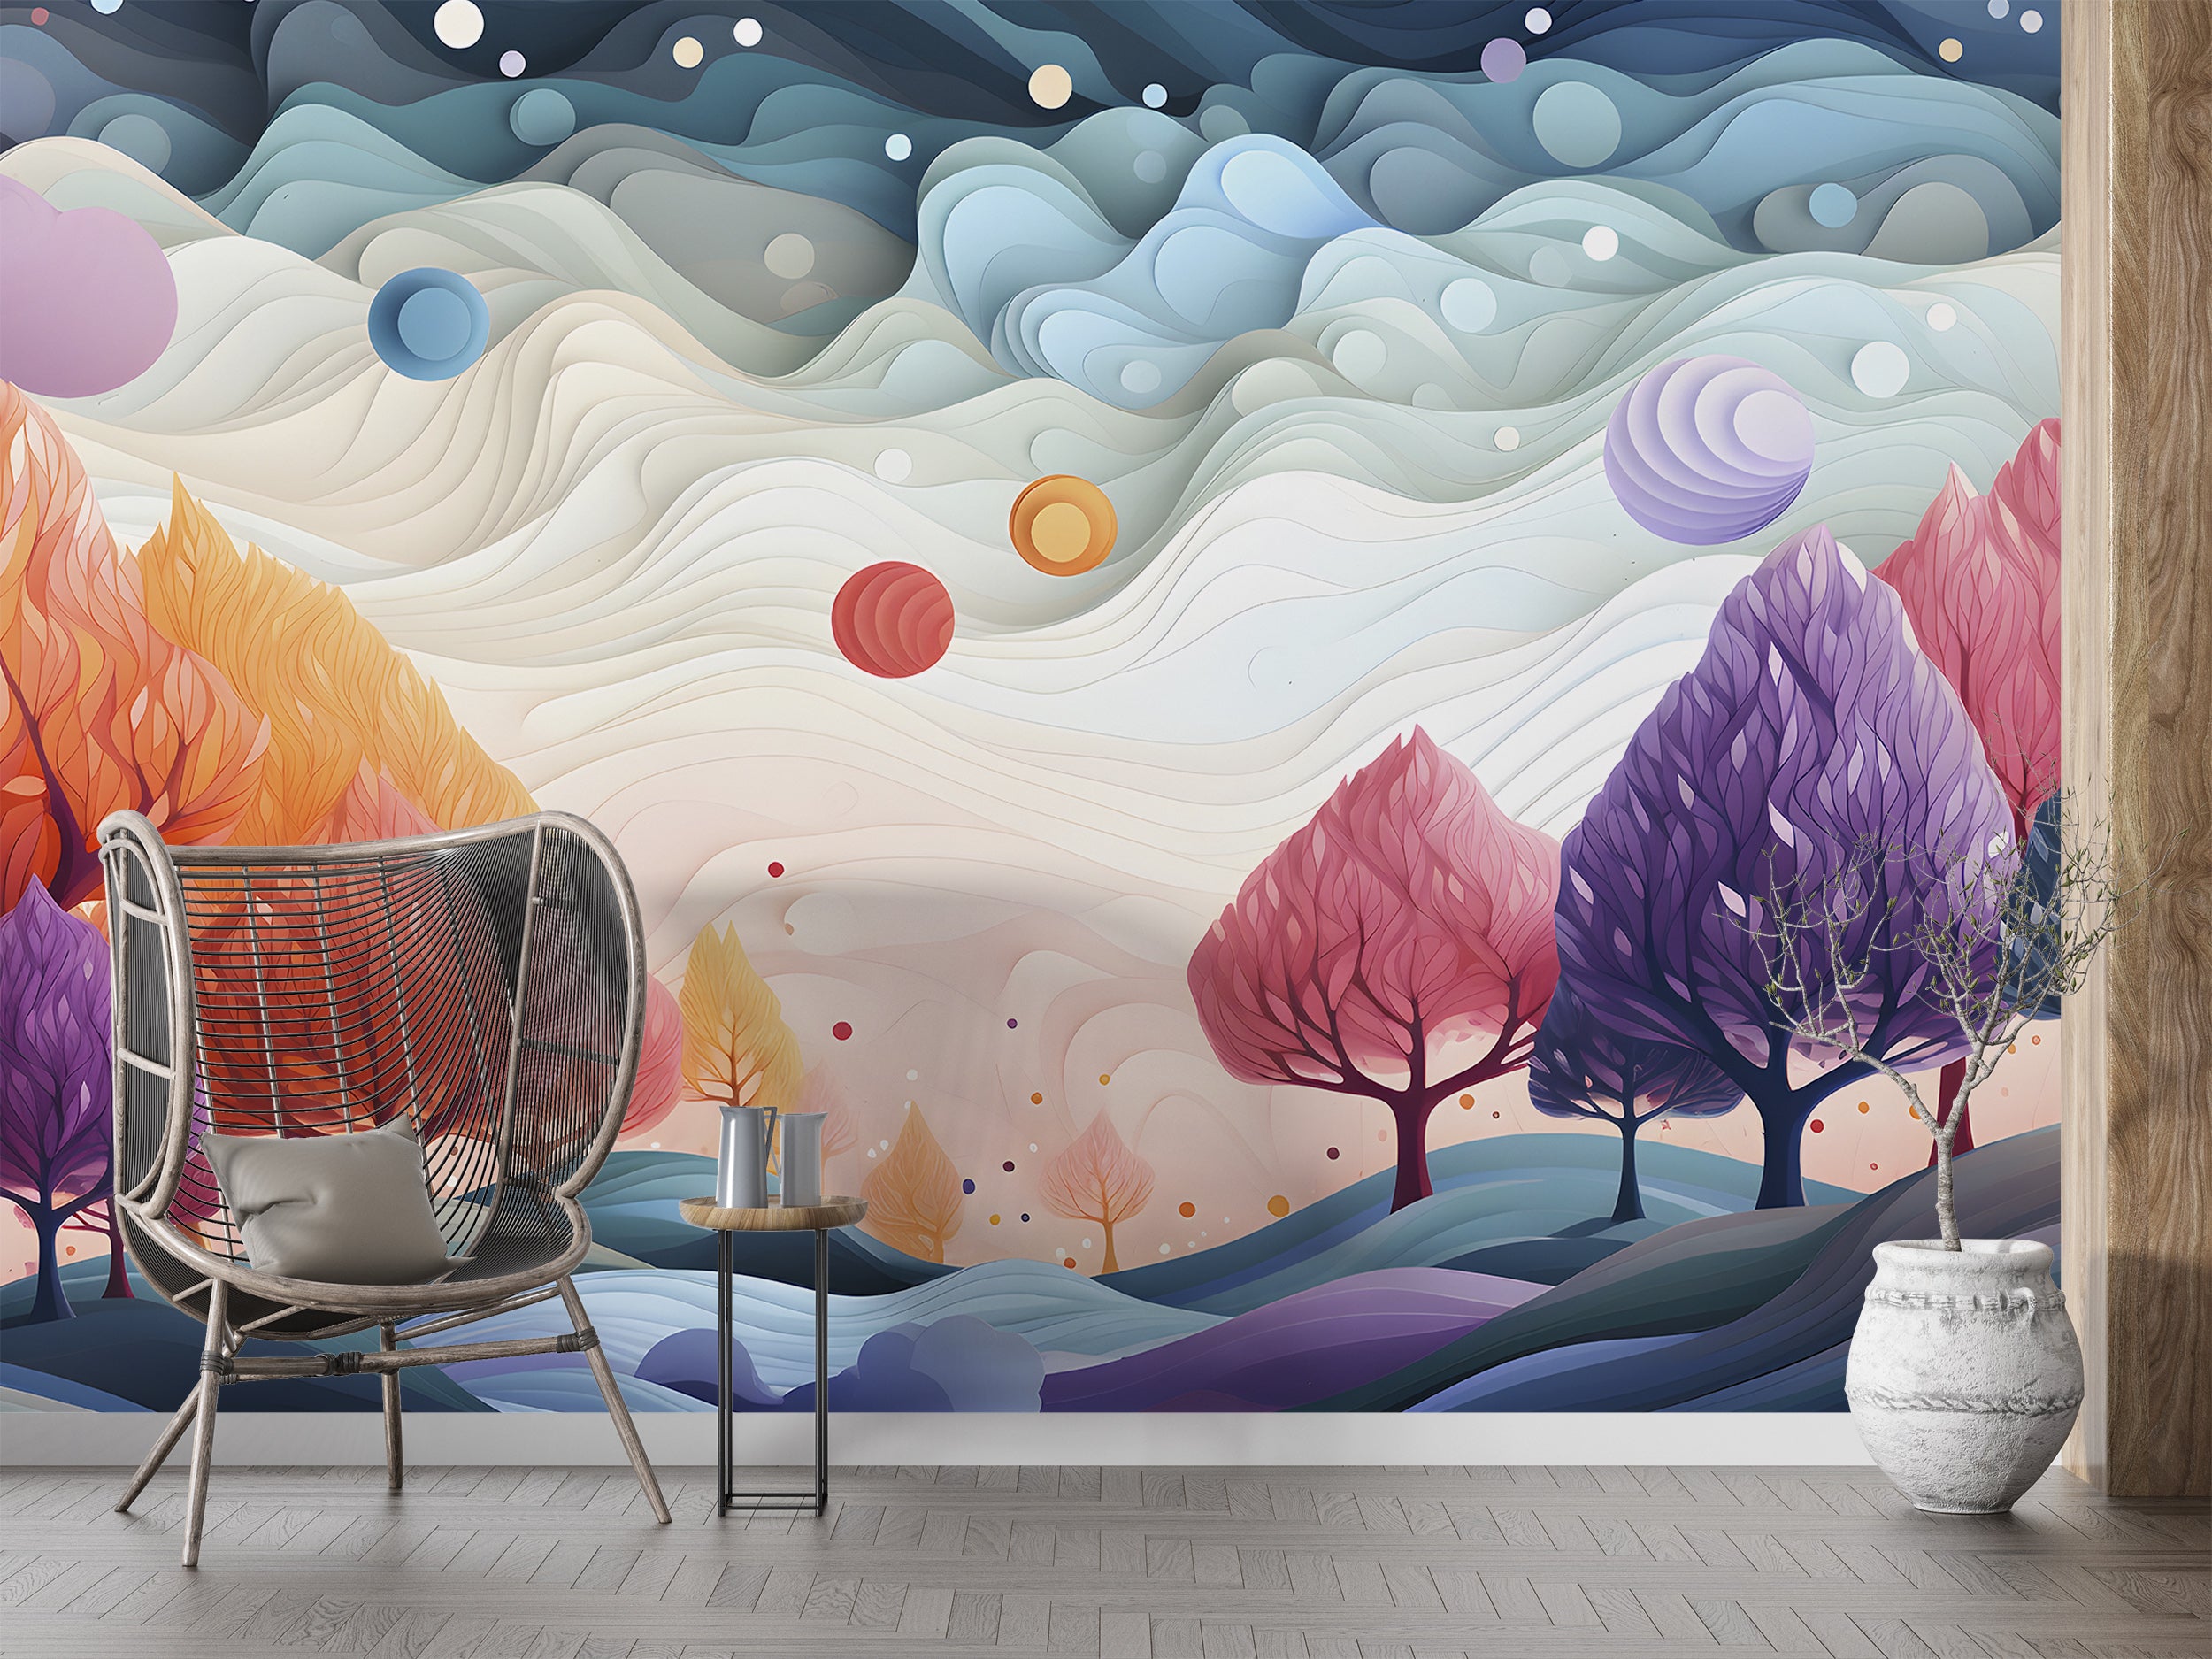 Redefine Your Space with Abstract Artistry